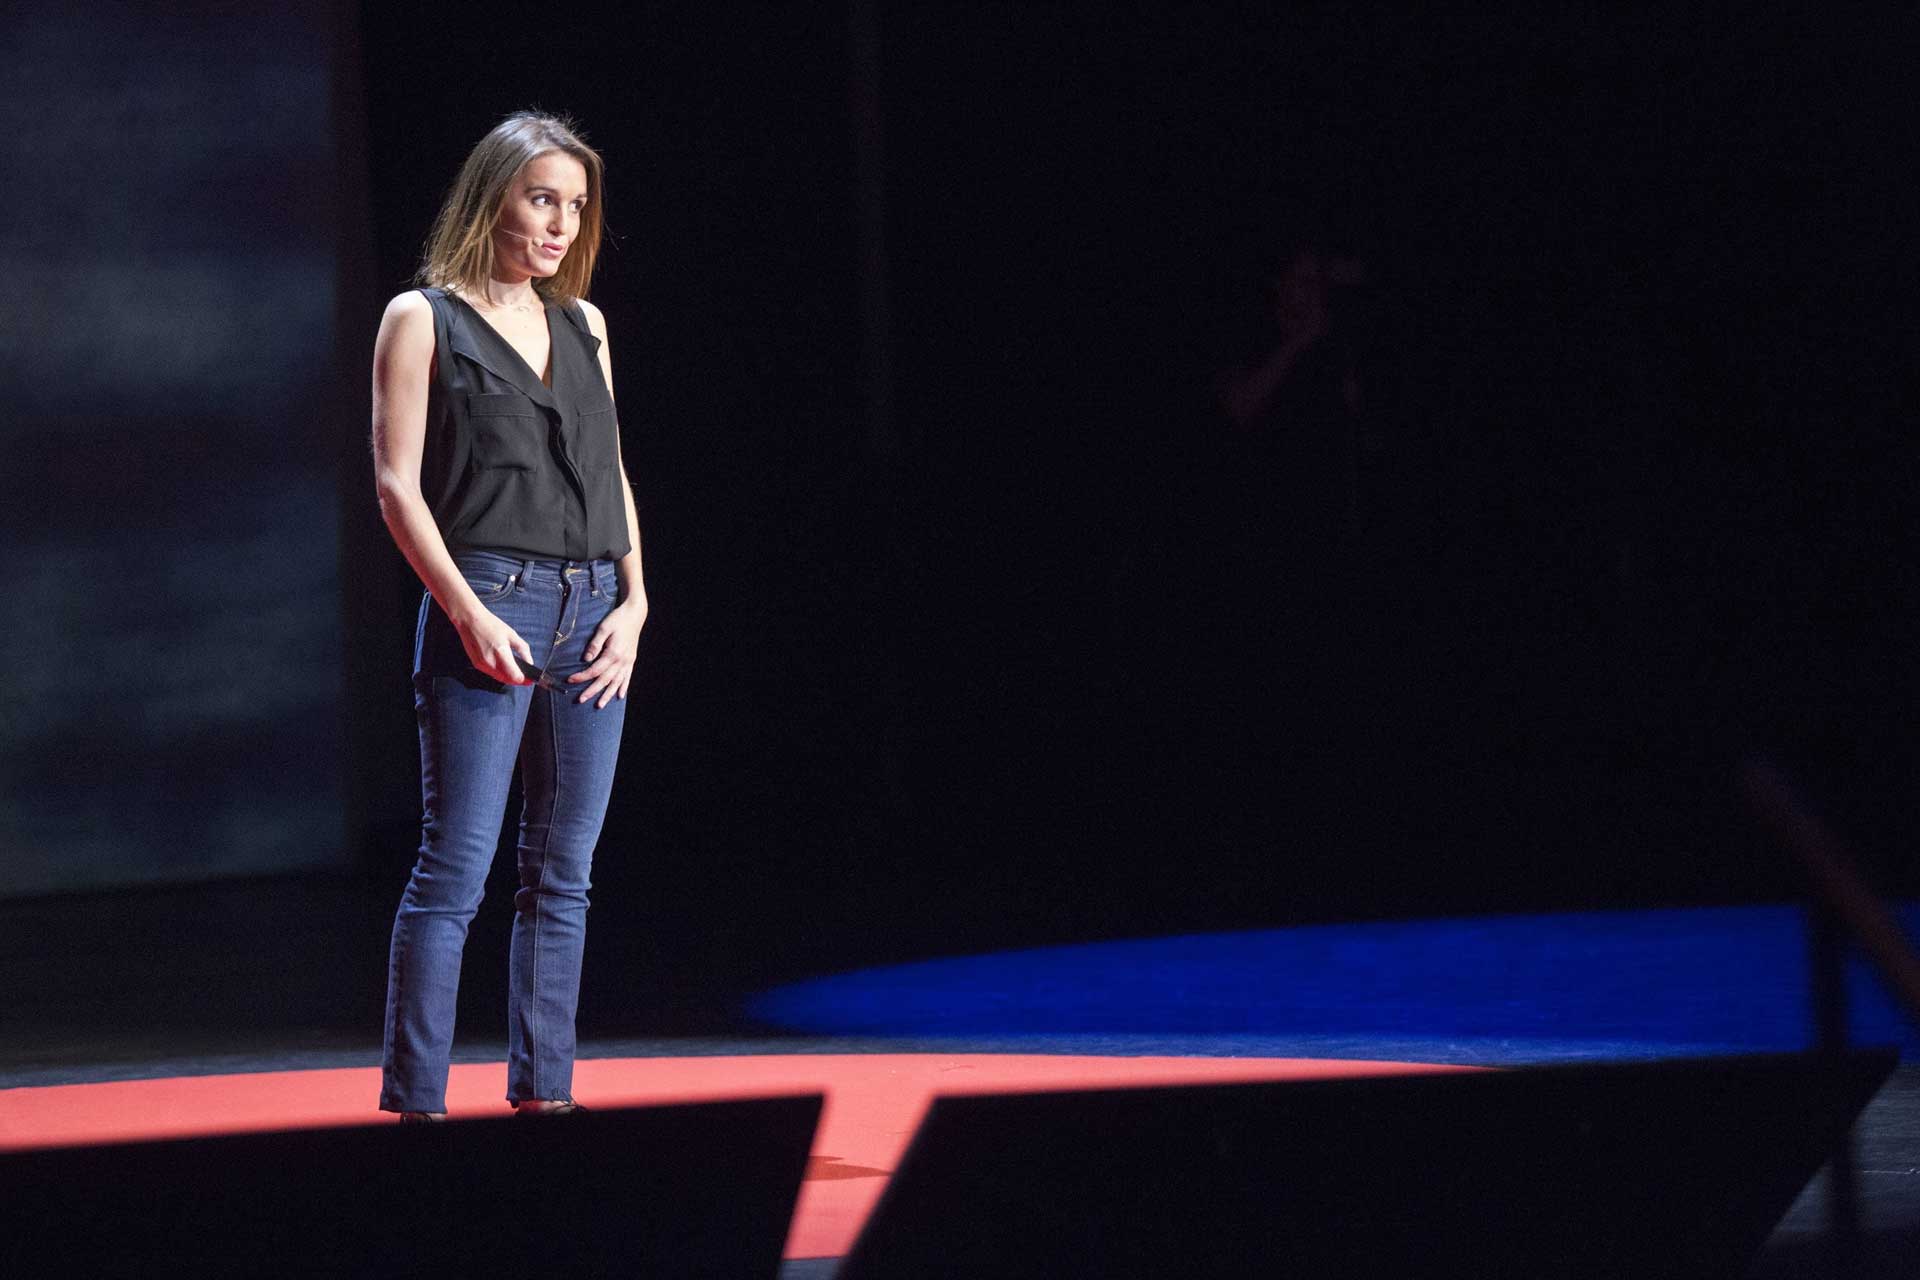 conference-TEDxParis-2014-14.jpg